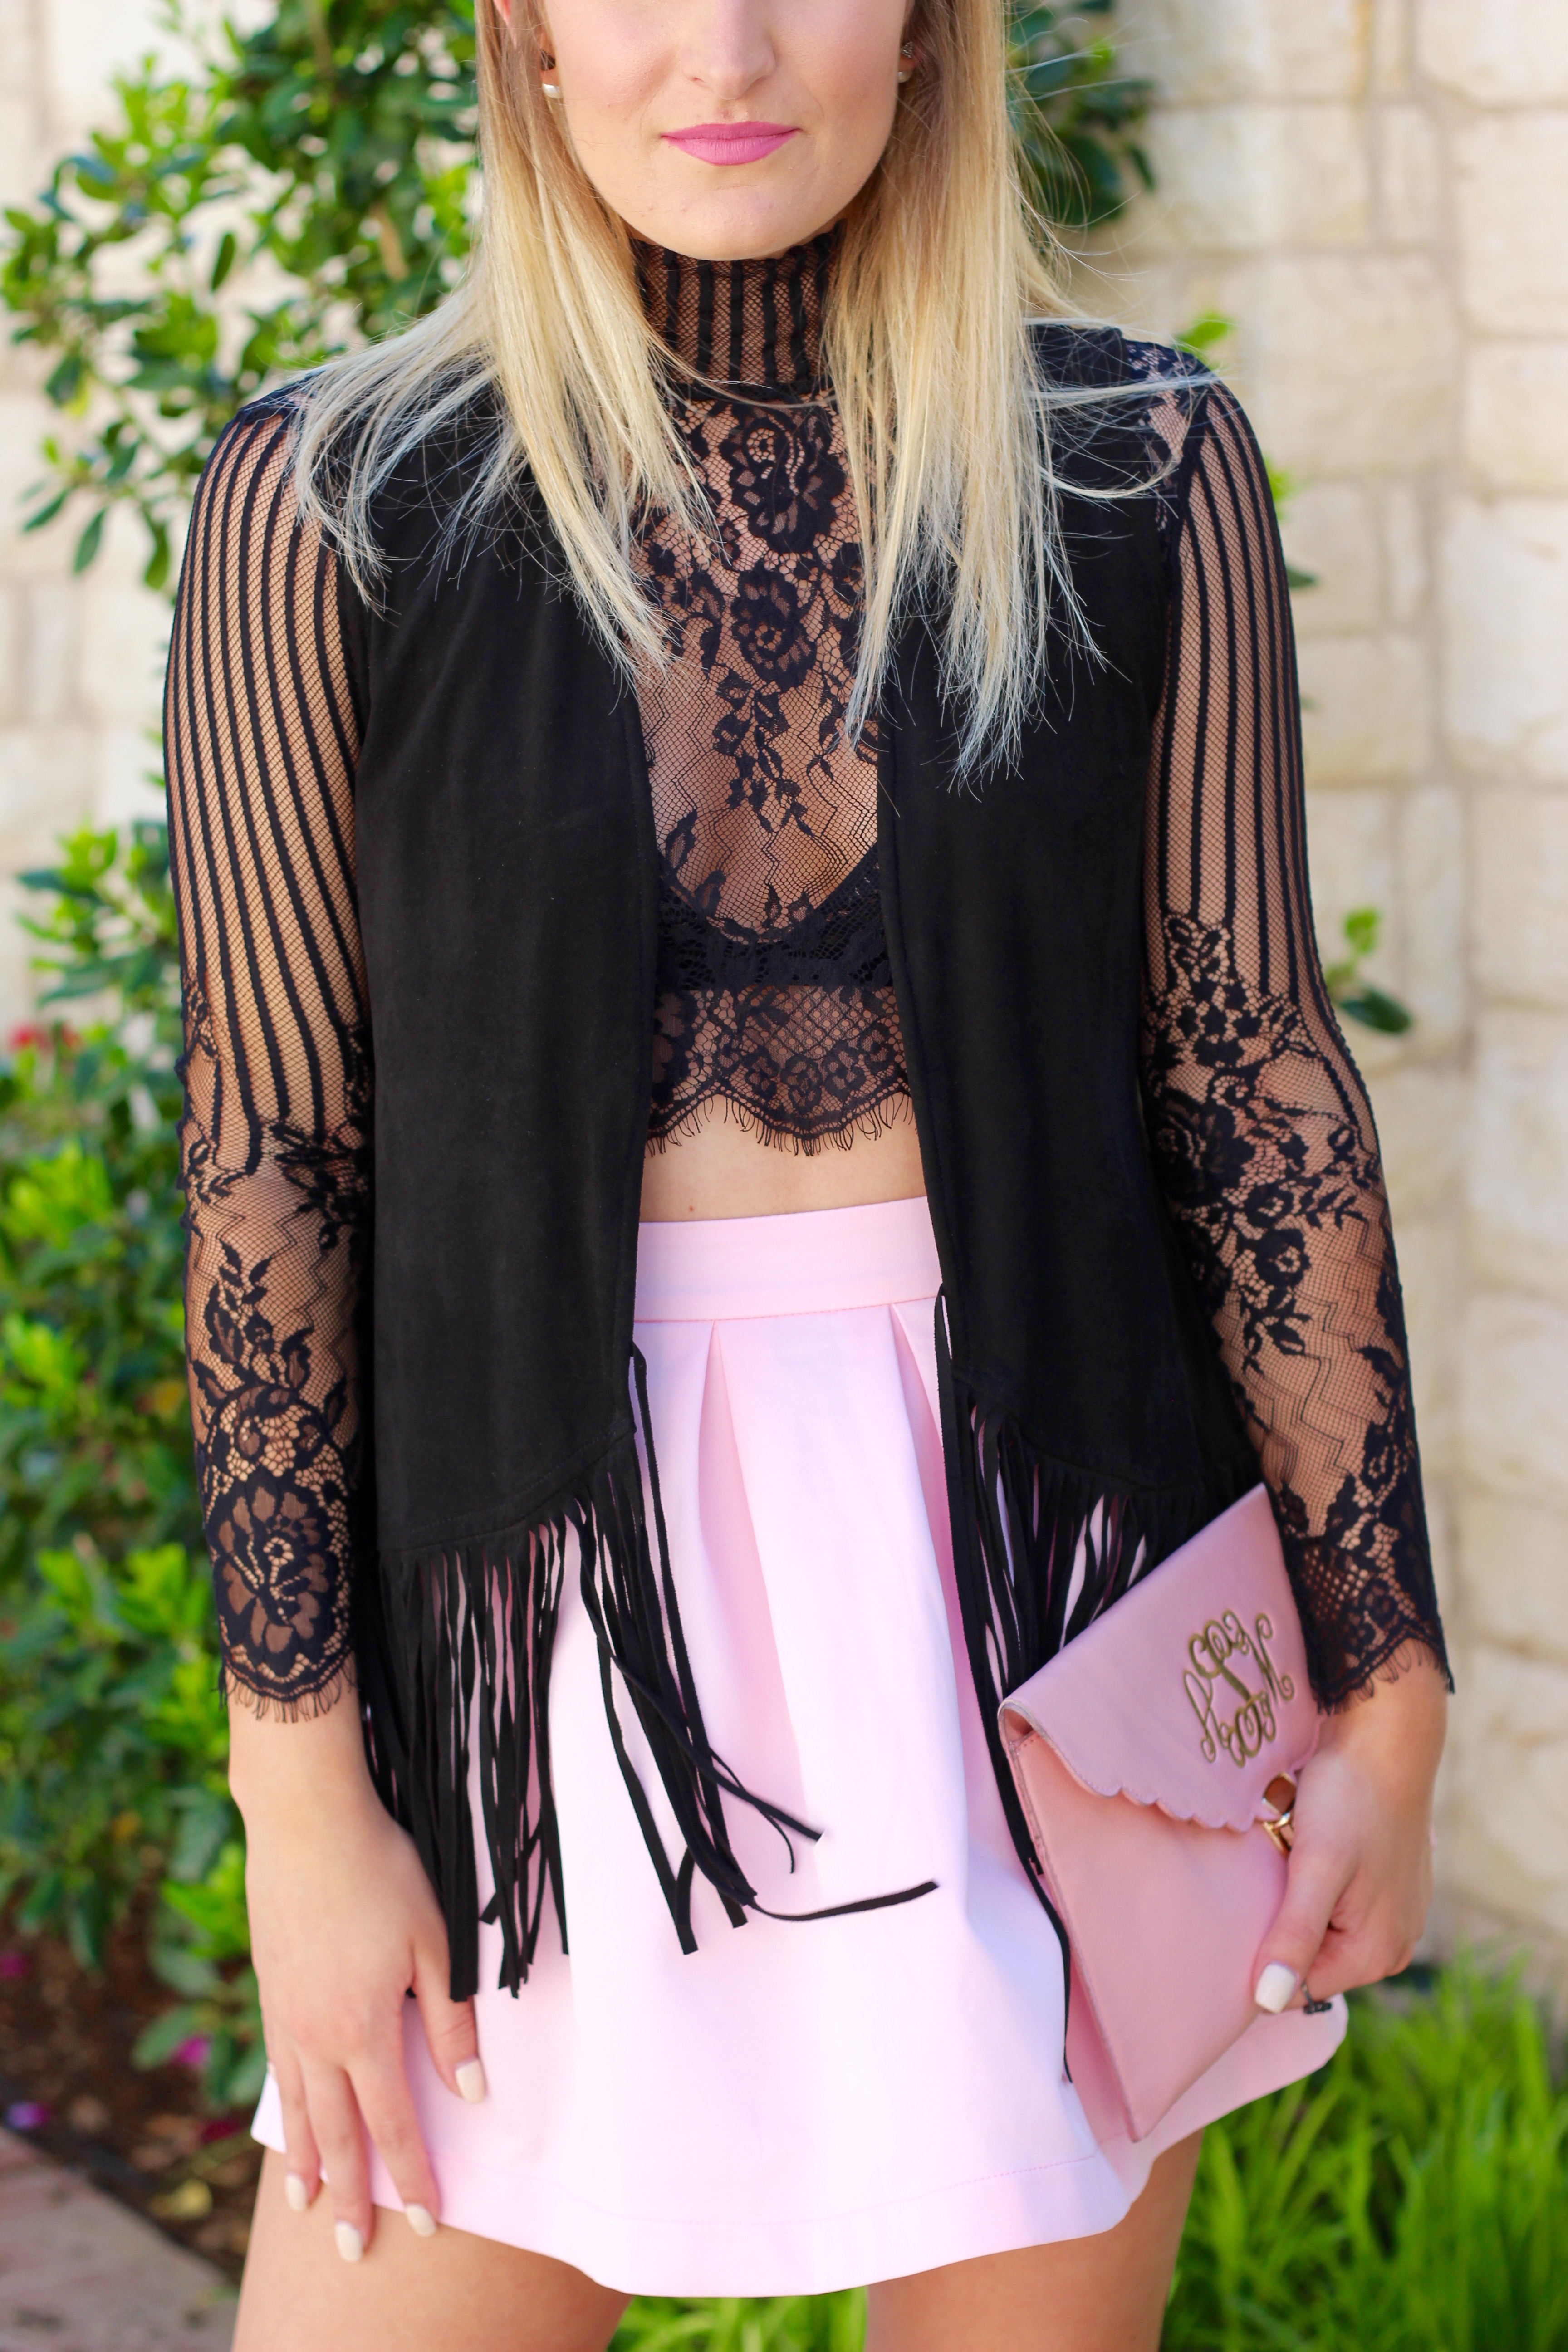 fringe vest with lace top and girly pink skirt - Lingerie Outfit By Day by popular Texas fashion blogger Audrey Madison Stowe